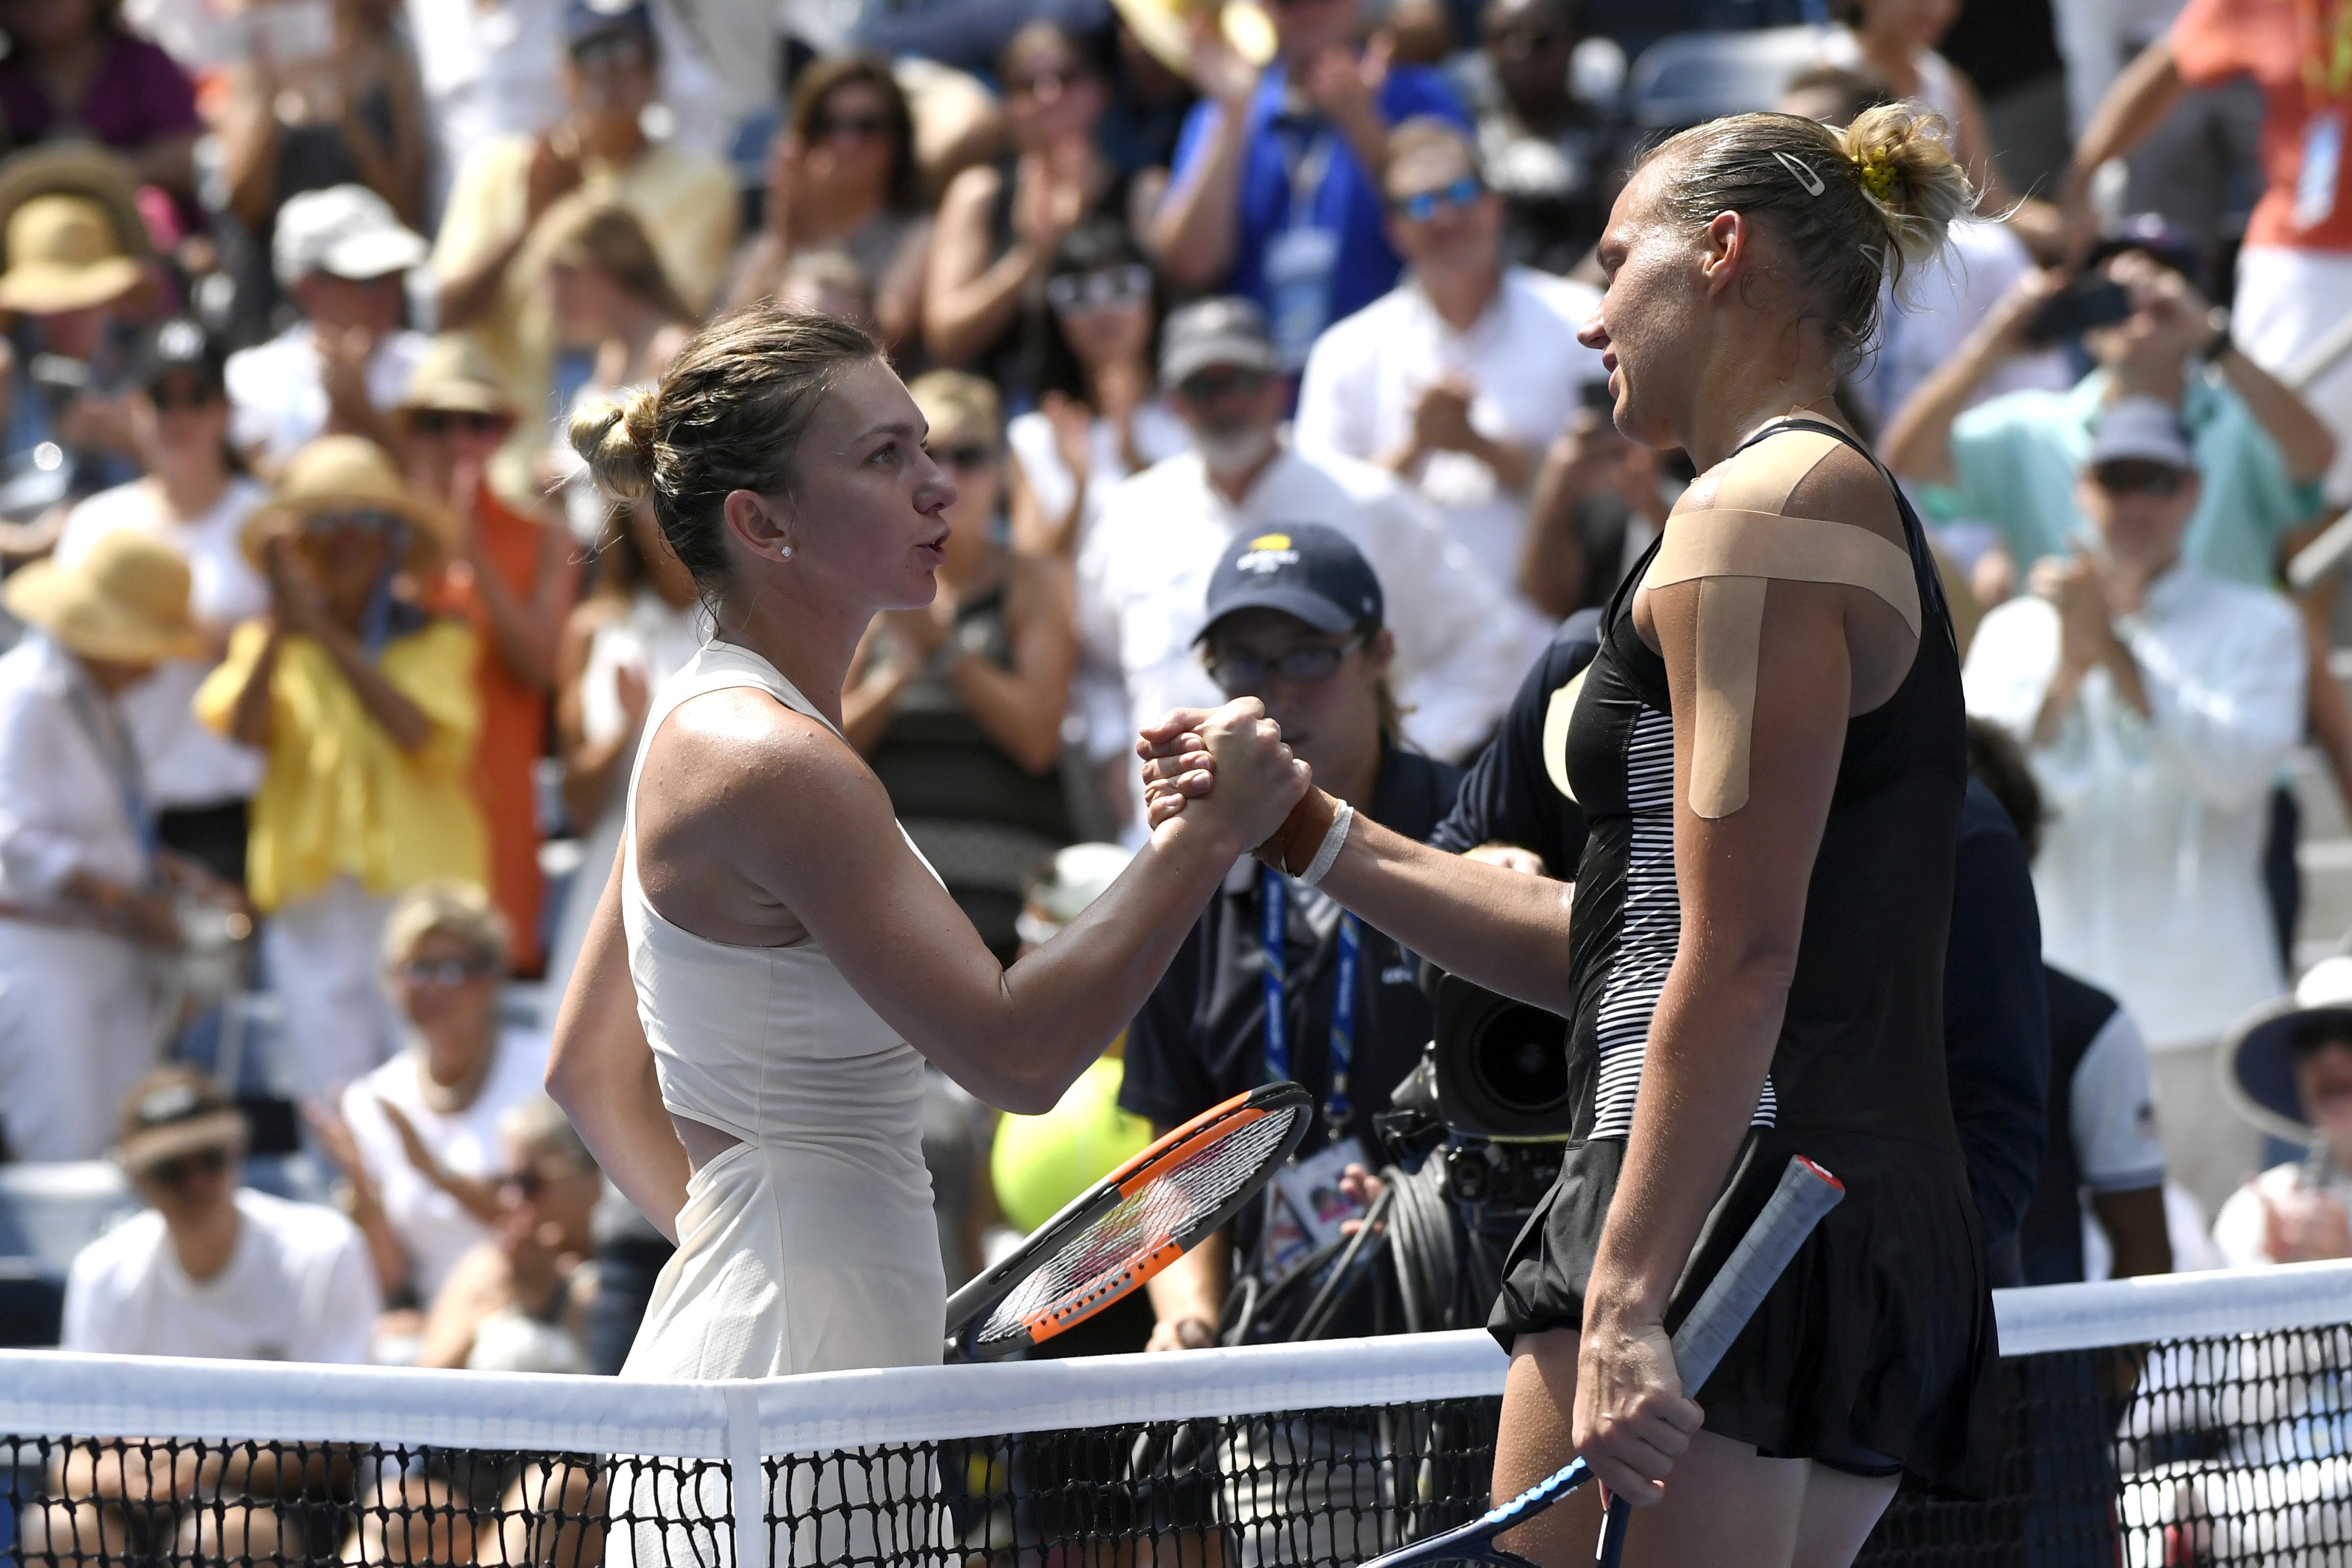 Tennis: World number one Halep stunned by Kanepi in U.S. Open first round